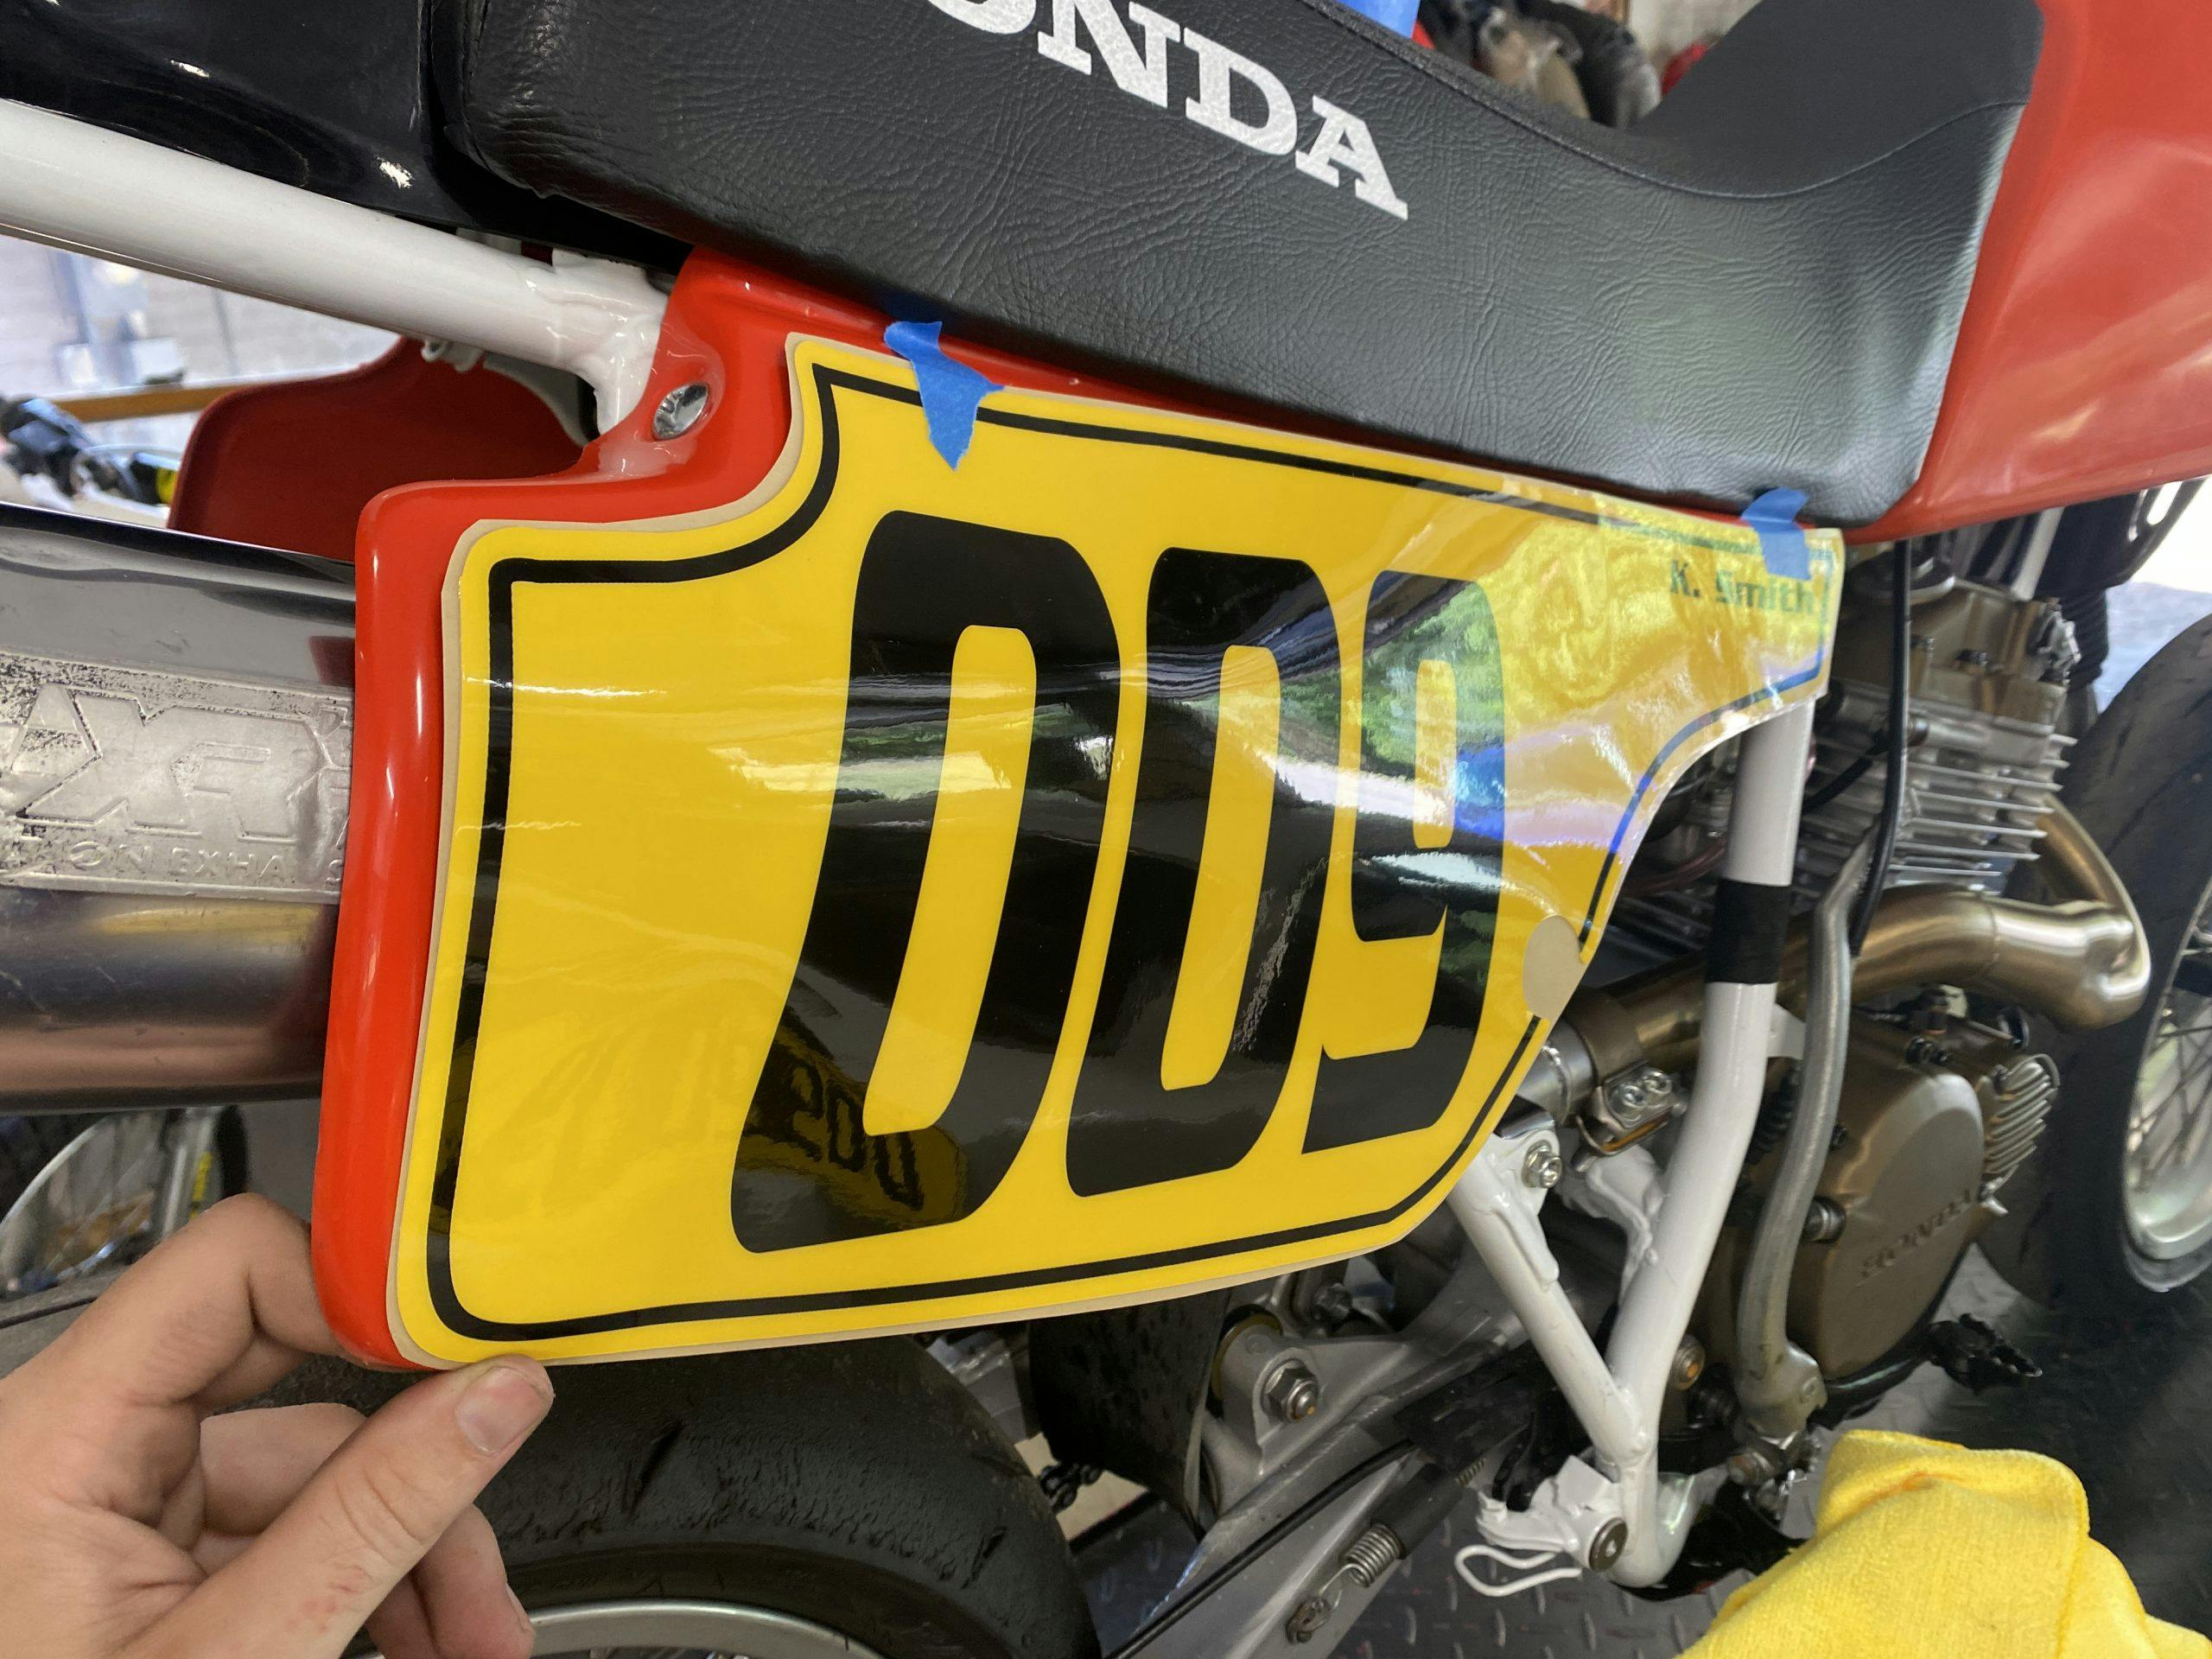 mocking up decals on race XR250R